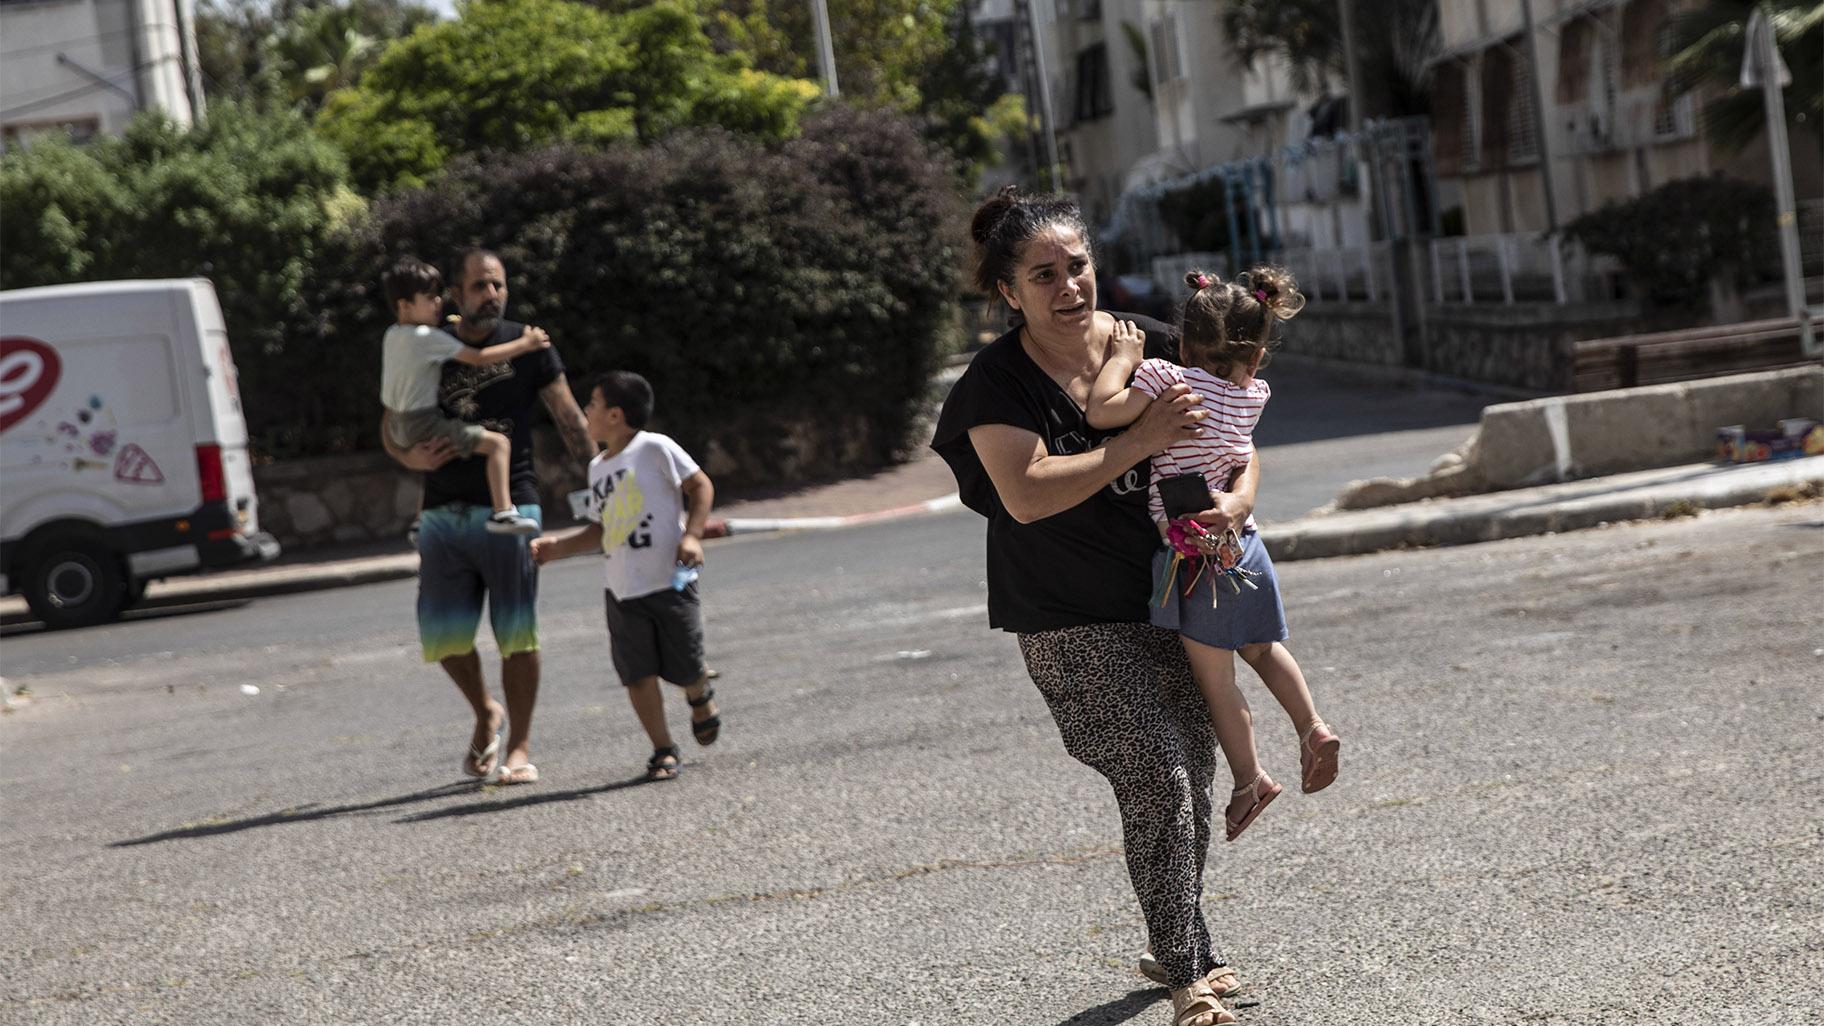 Lia Tal, 40, rushes with her children and partner to take shelter as a siren sounds a warning of incoming rockets fired from the Gaza Strip, In Ashdod, Israel, Thursday, May 20, 2021. (AP Photo / Heidi Levine)